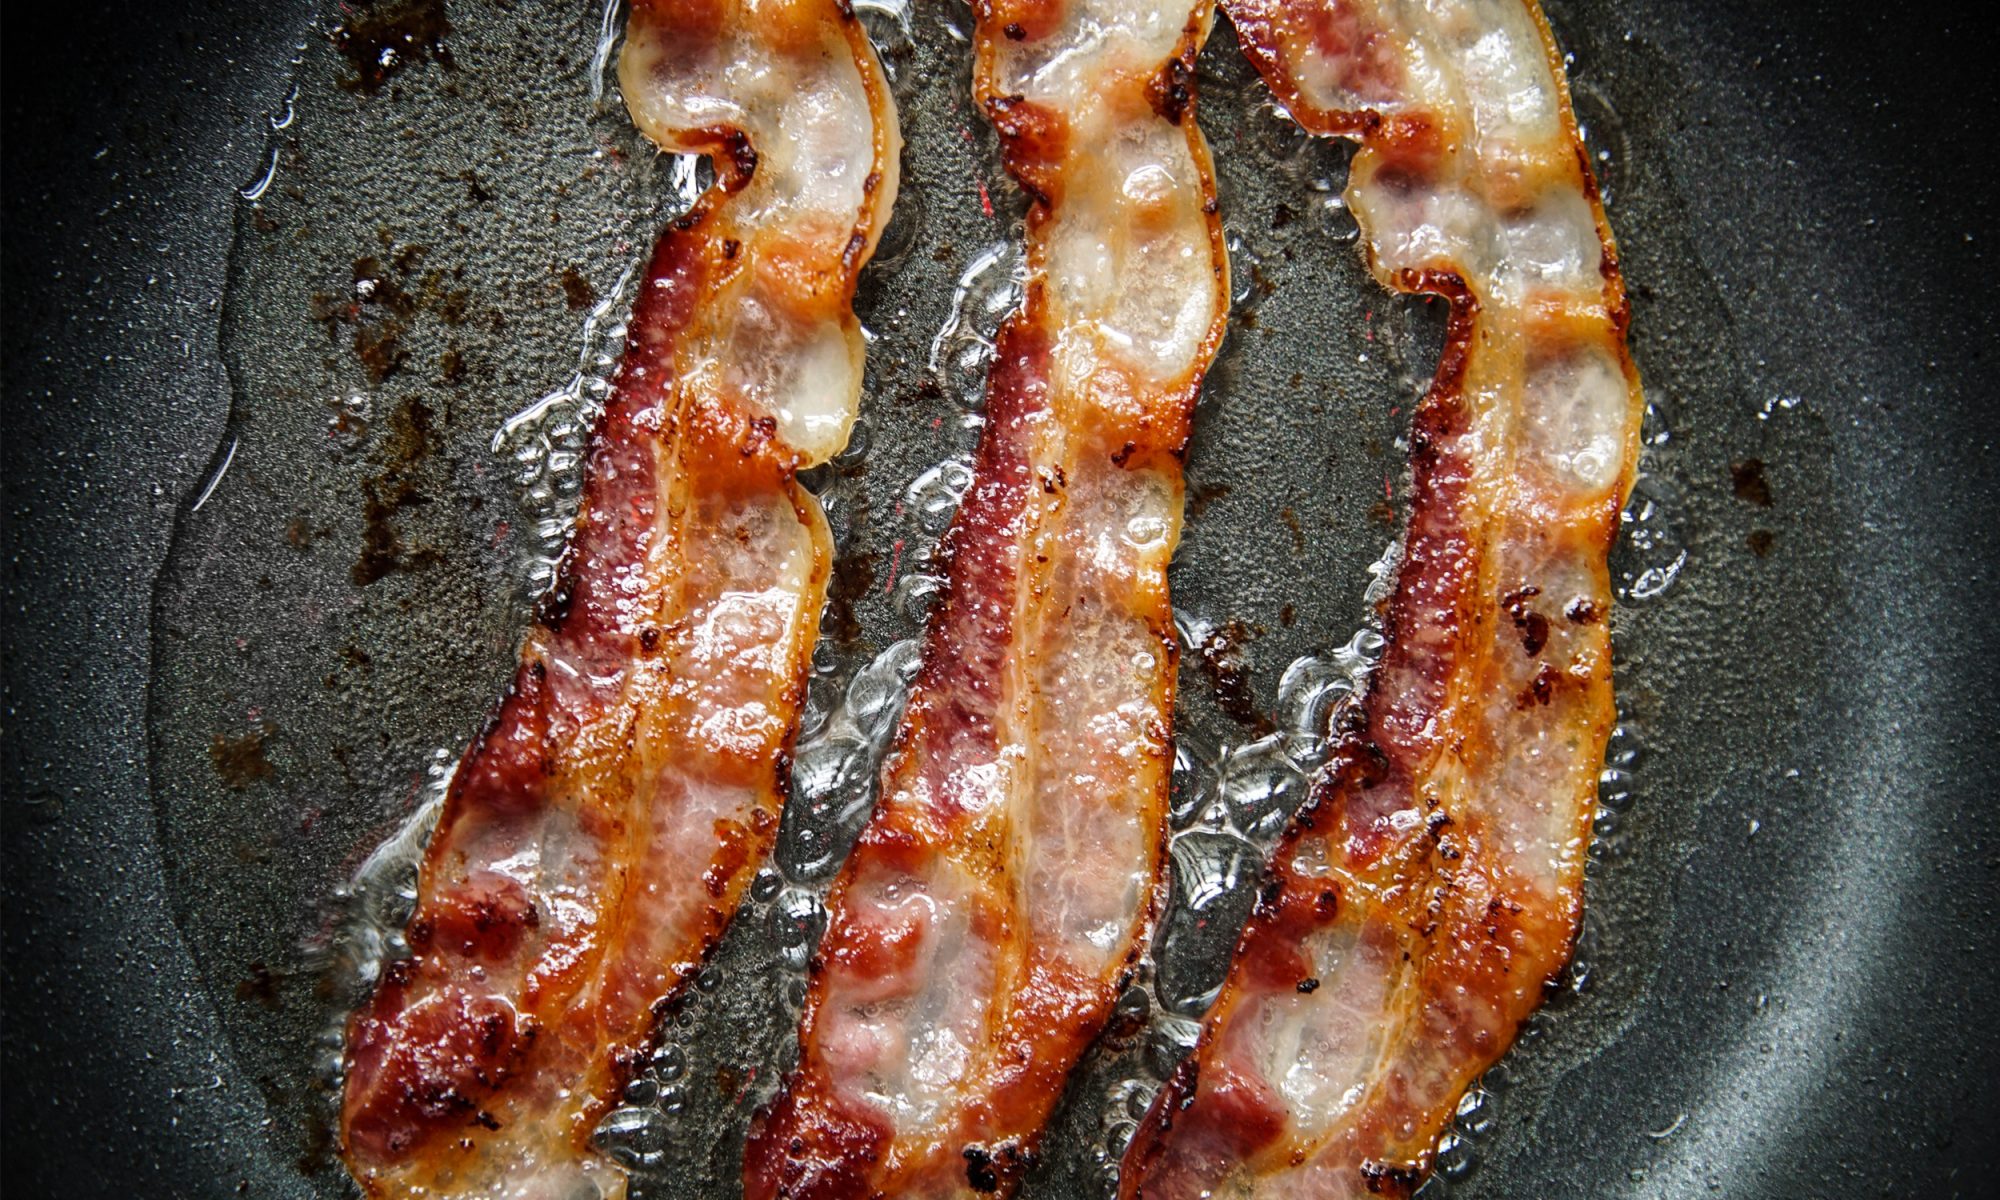 How To Store and Use Excess Bacon Grease